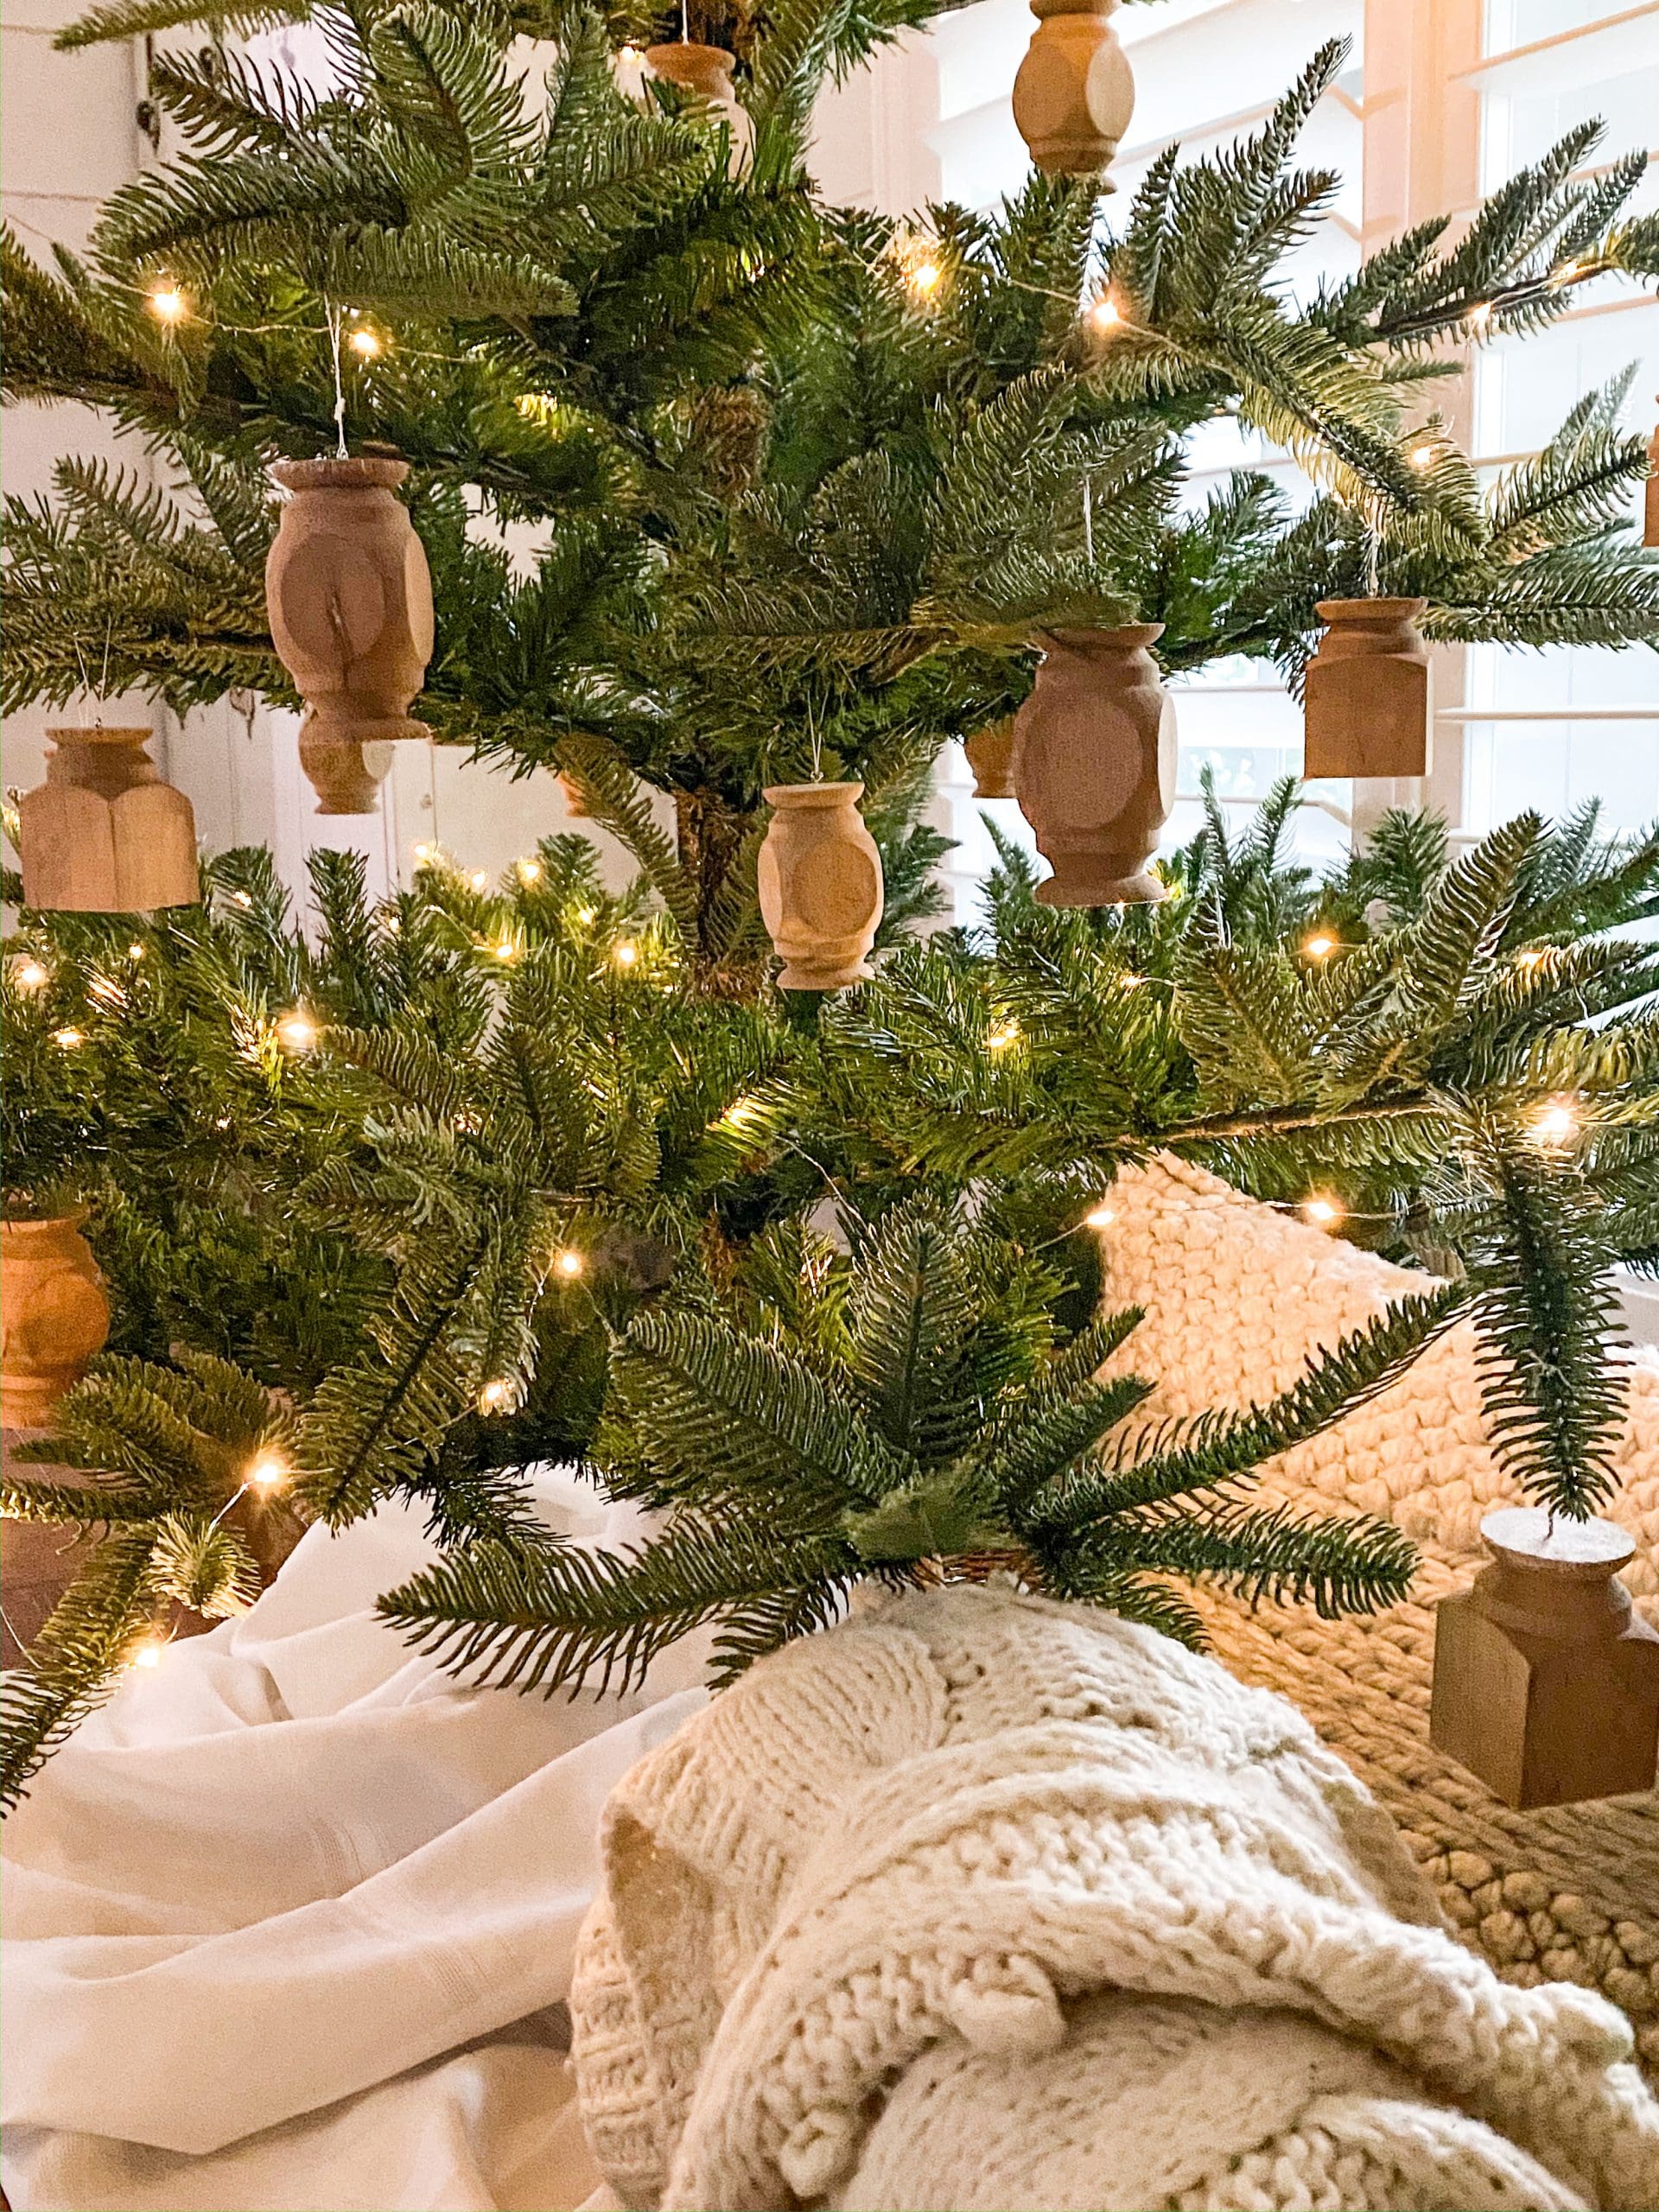 How to Make Easy DIY Vintage Ornaments with Architectural Salvage